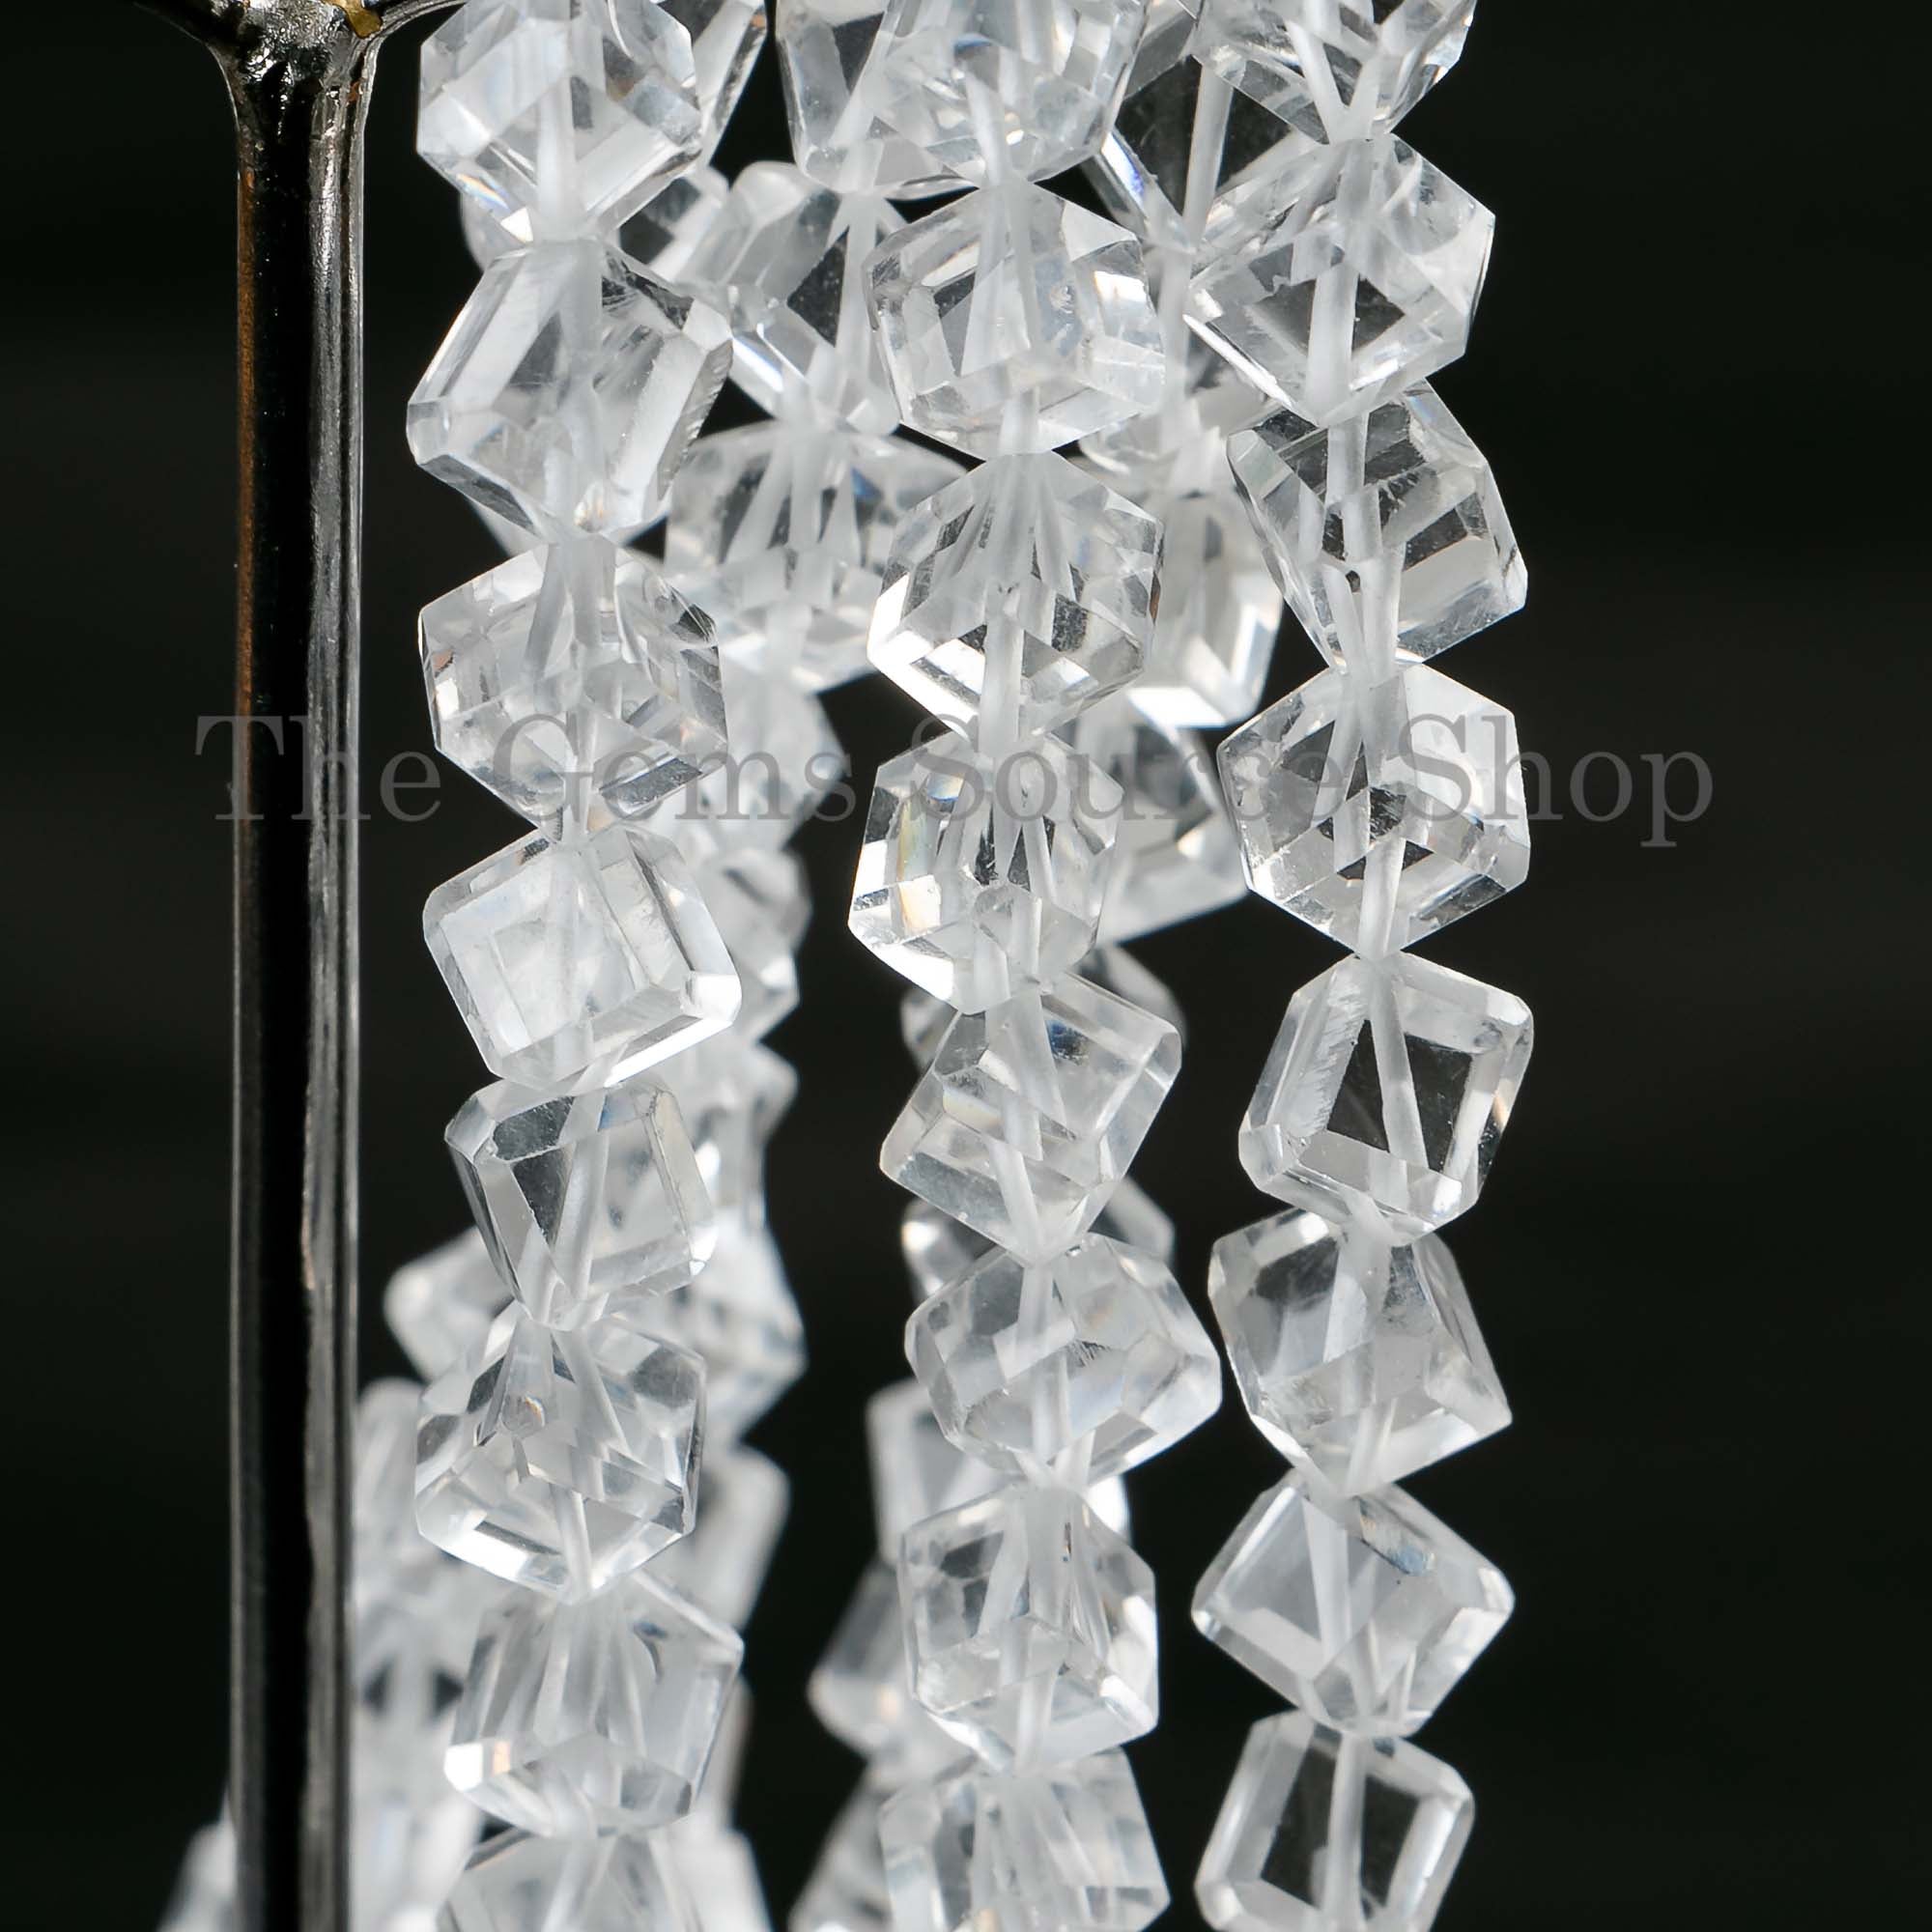 Crystal Quartz Faceted Box Shape Beads, Crystal Quartz Beads, Box Shape Beads, Faceted Beads